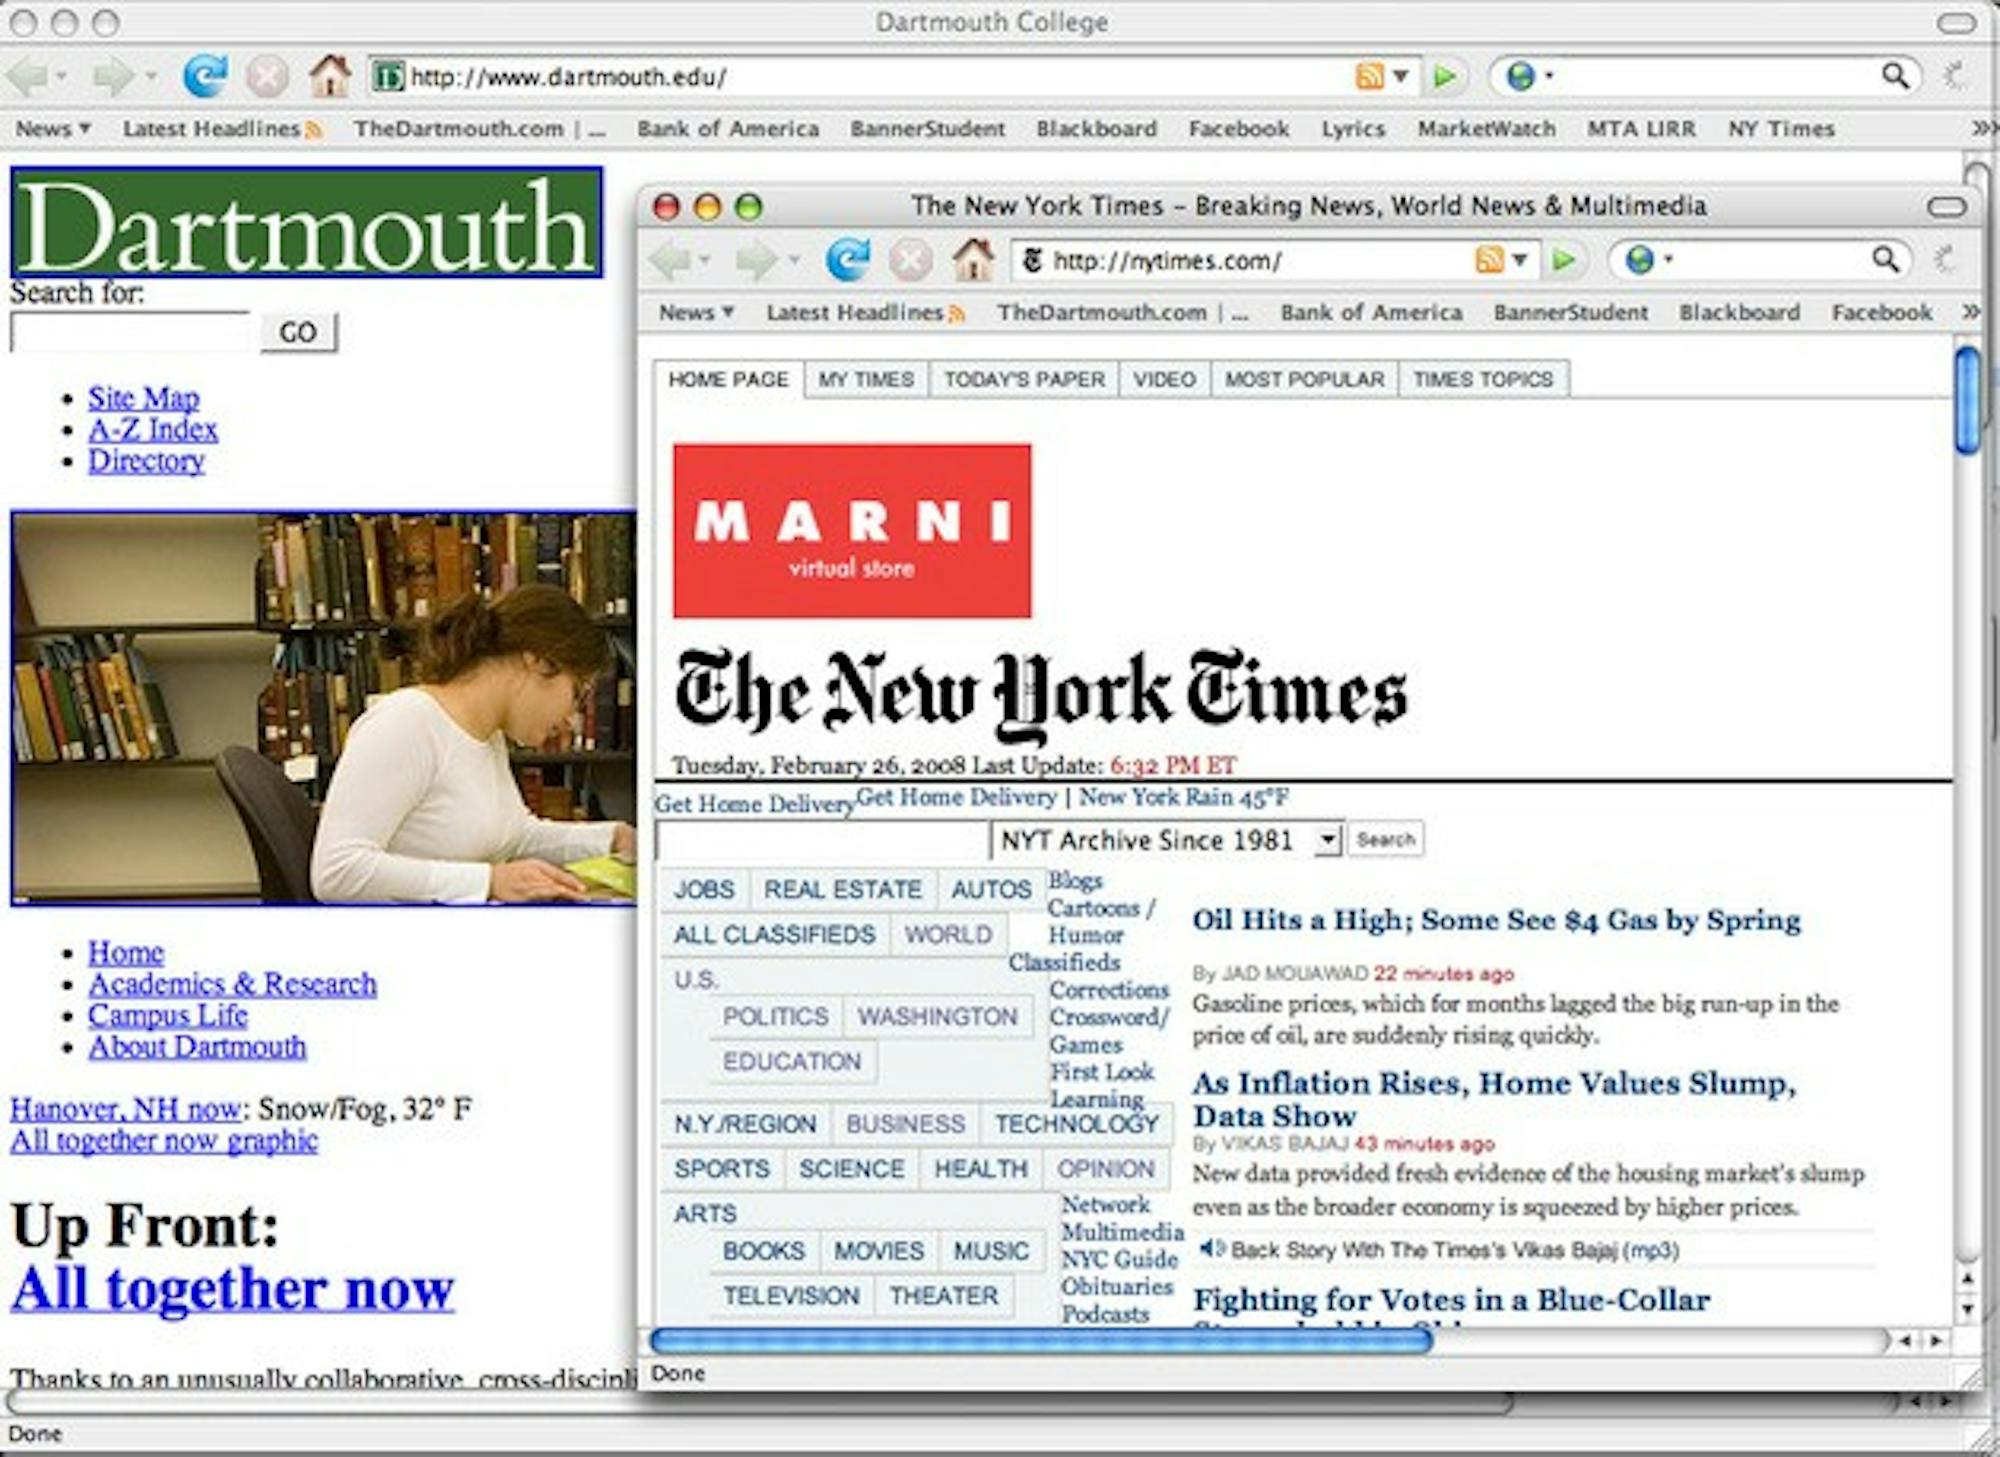 Mac users experience difficulty accessing websites, such as The New York Times online, through the Mozilla Firefox web browser. No students have reported the problem to Network Services, according to director Frank Archambeault.